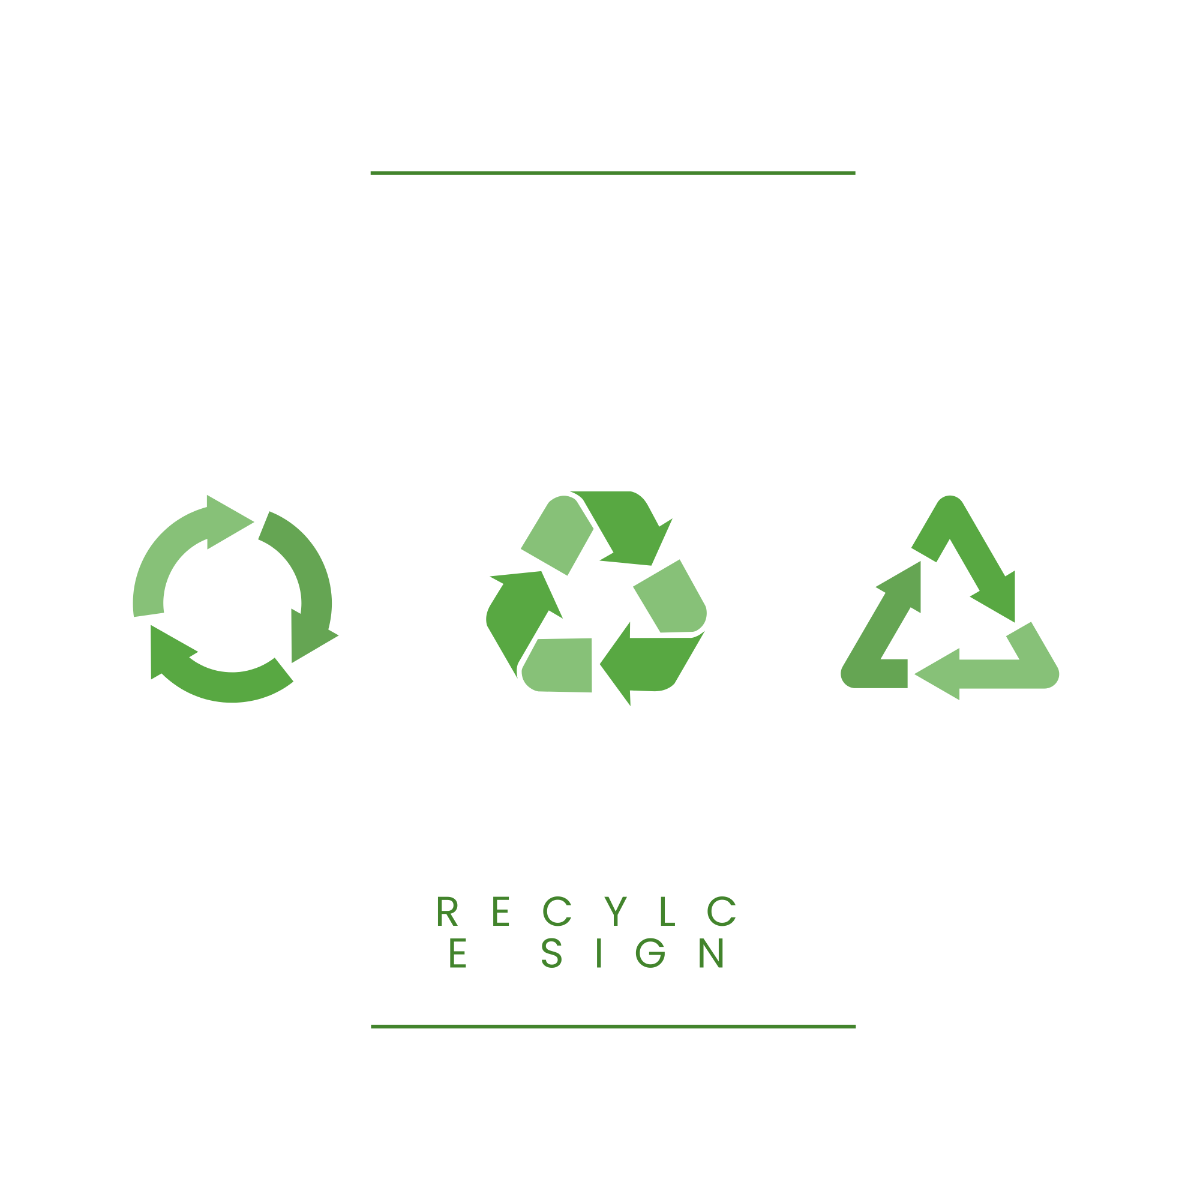 Recycle Sign Vector